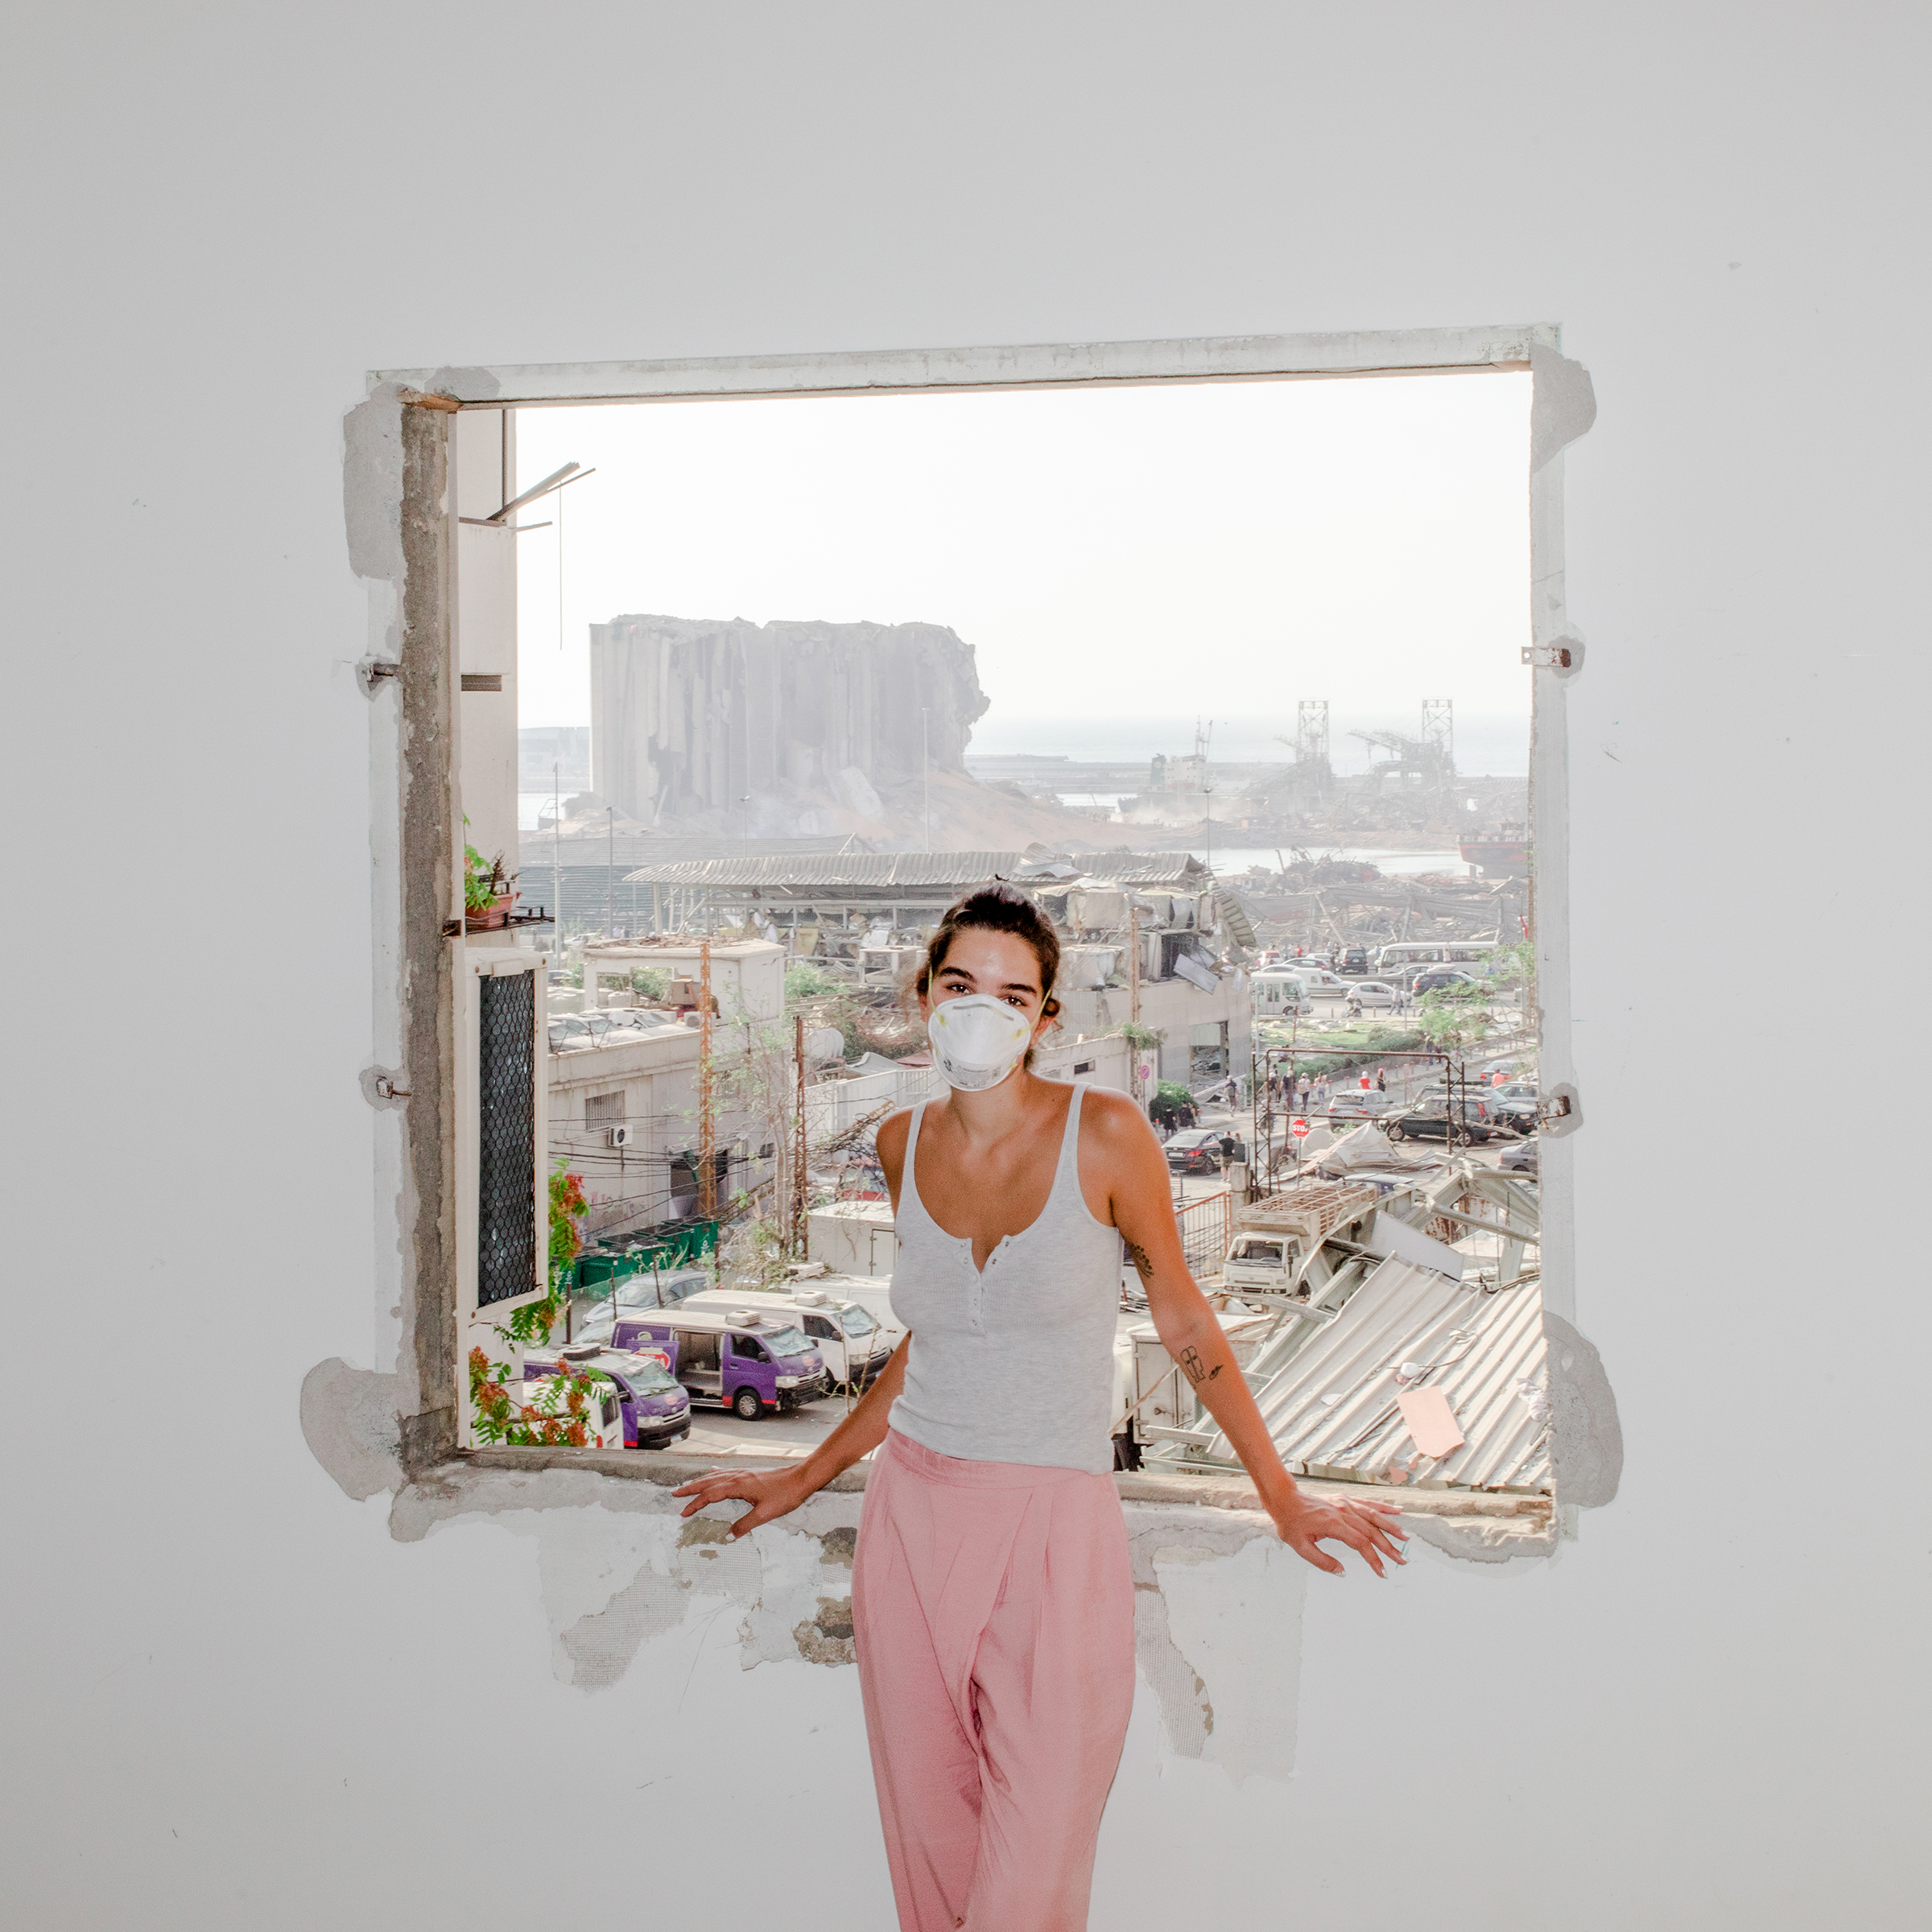 Nour Saliba stands in her apartment in the Mar Mikhael area of Beirut on Aug. 6, two days after the deadly explosion at the city’s port, seen through her blown-out window. “Honestly, I had it easy. I only lost my home. I am one of the lucky ones who still have their family and friends by their side,” says the 27-year-old community manager and model. “Trauma is written all over the fumes of this explosion. Yes, we are all traumatized, but we are also burnt out."